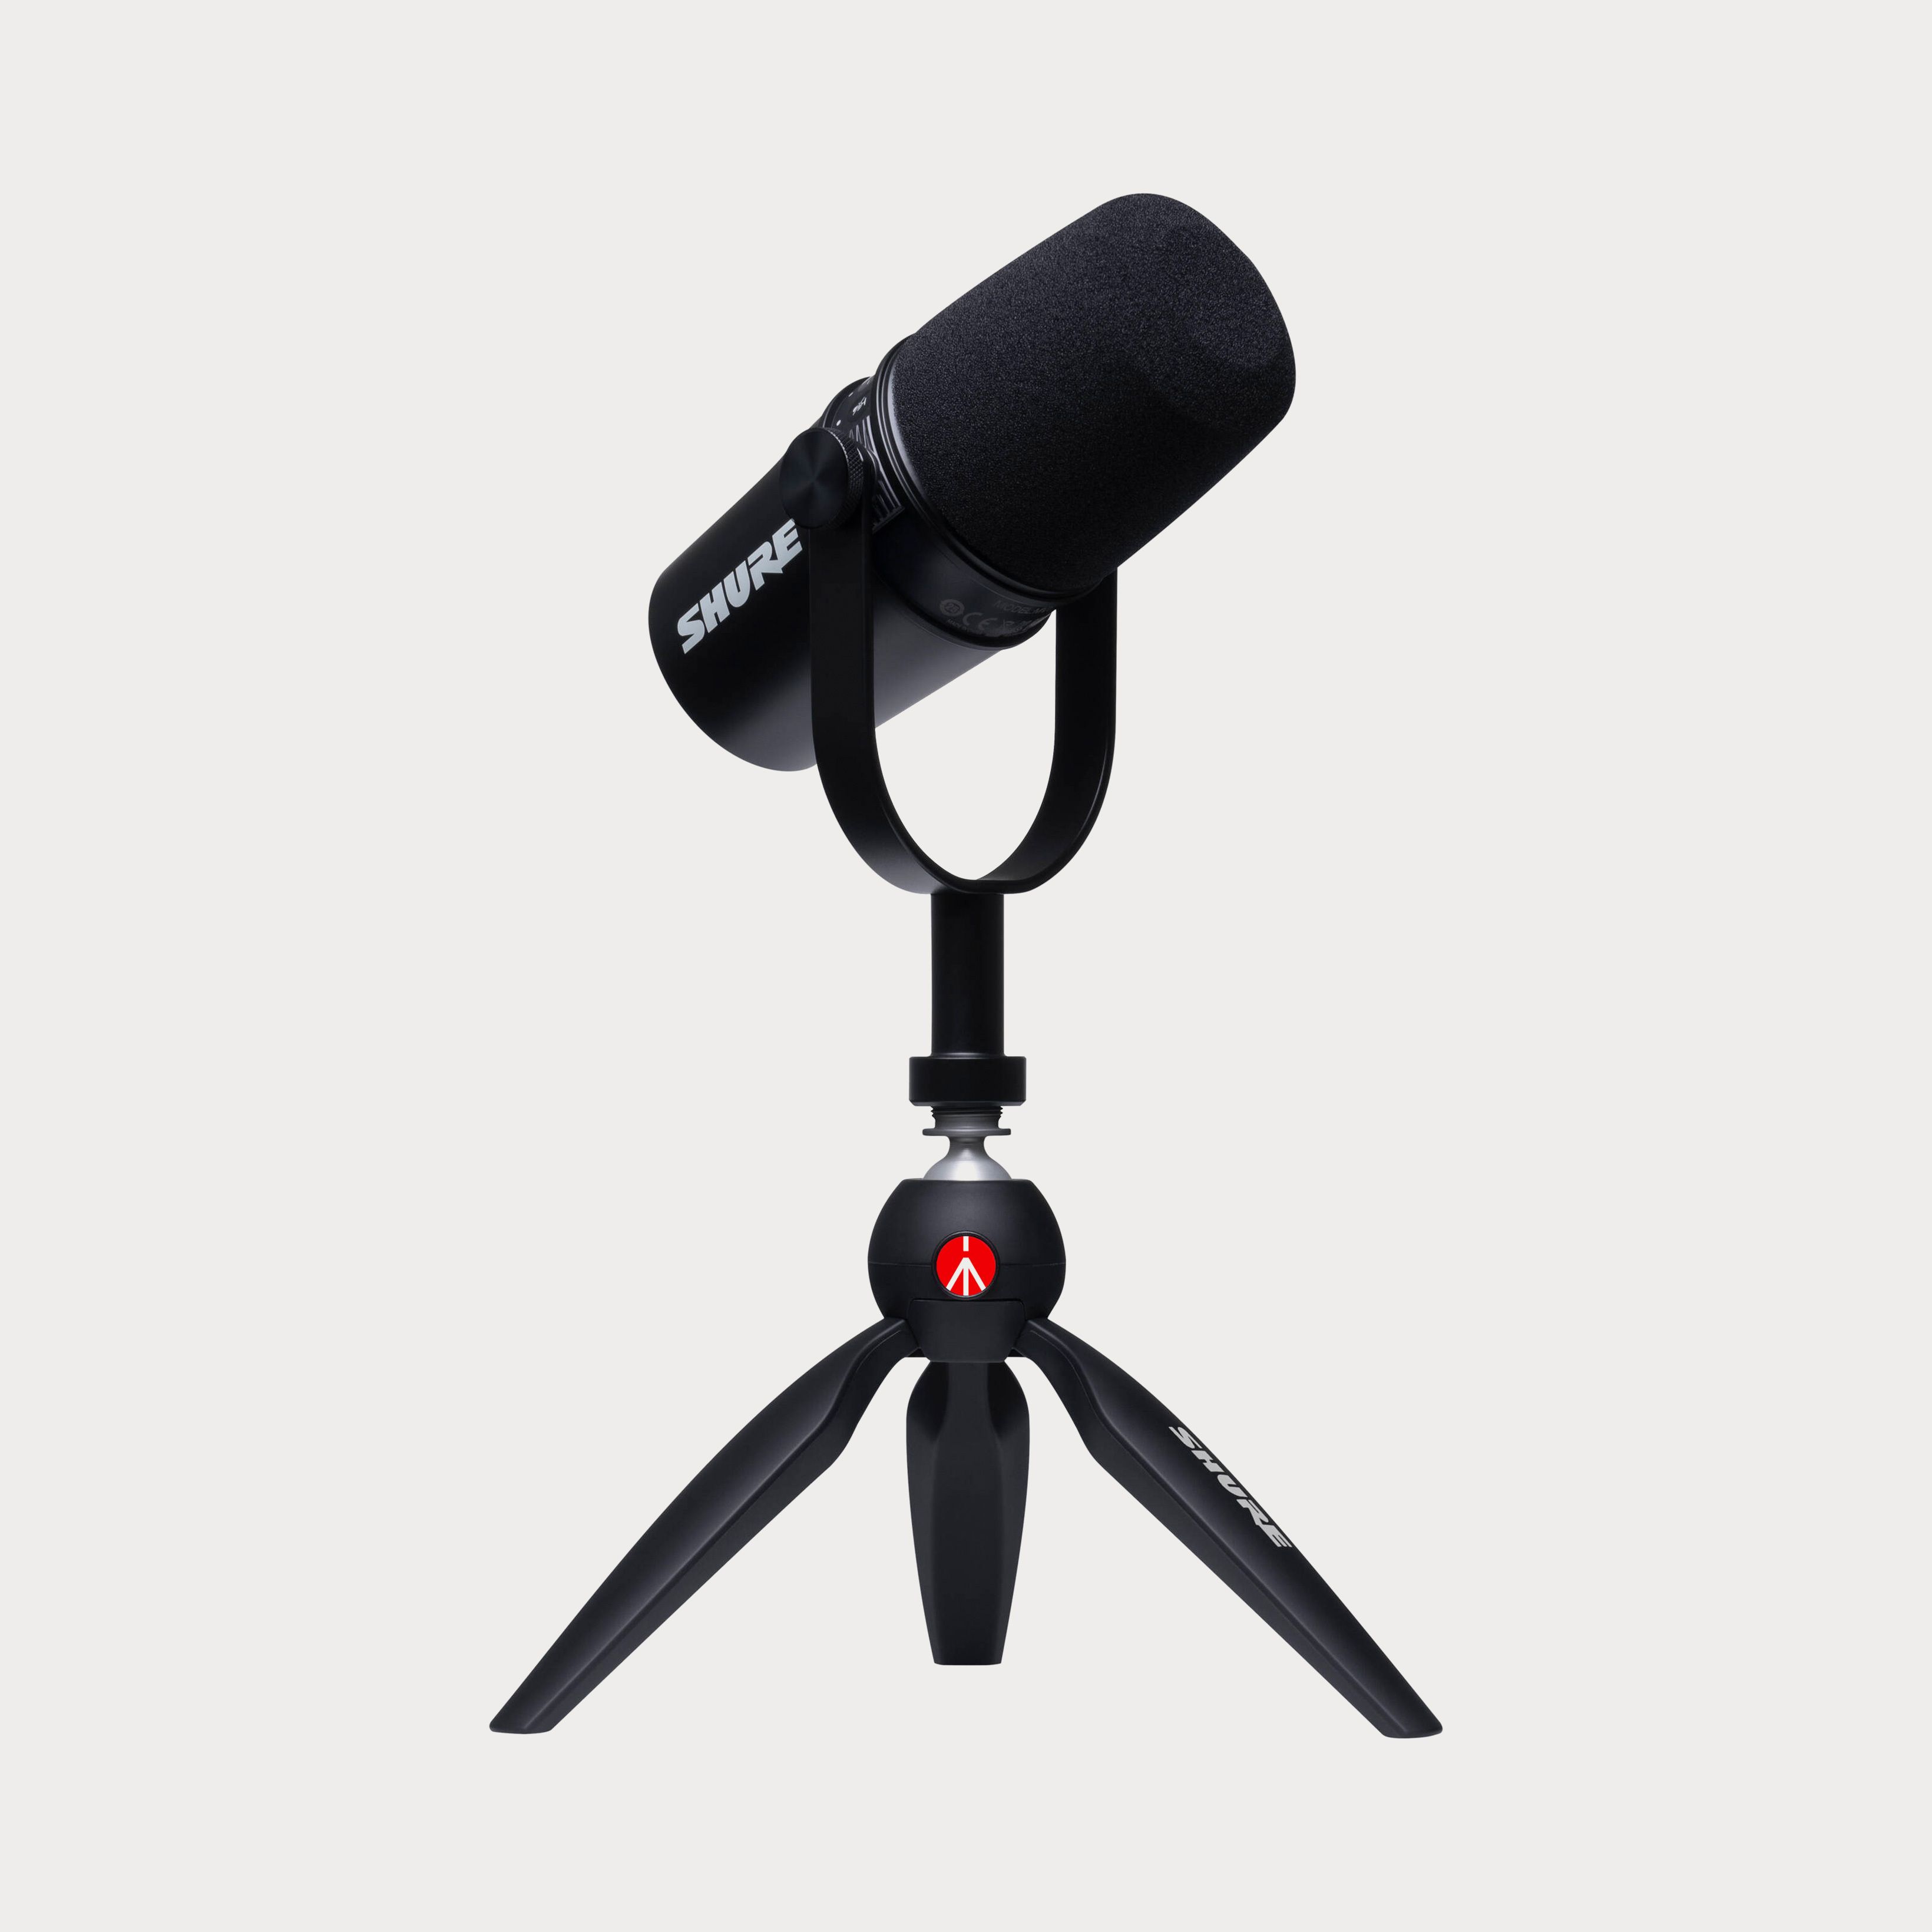 Shure MV88+ Microphone Video Kit for iOS and USB-C | Moment